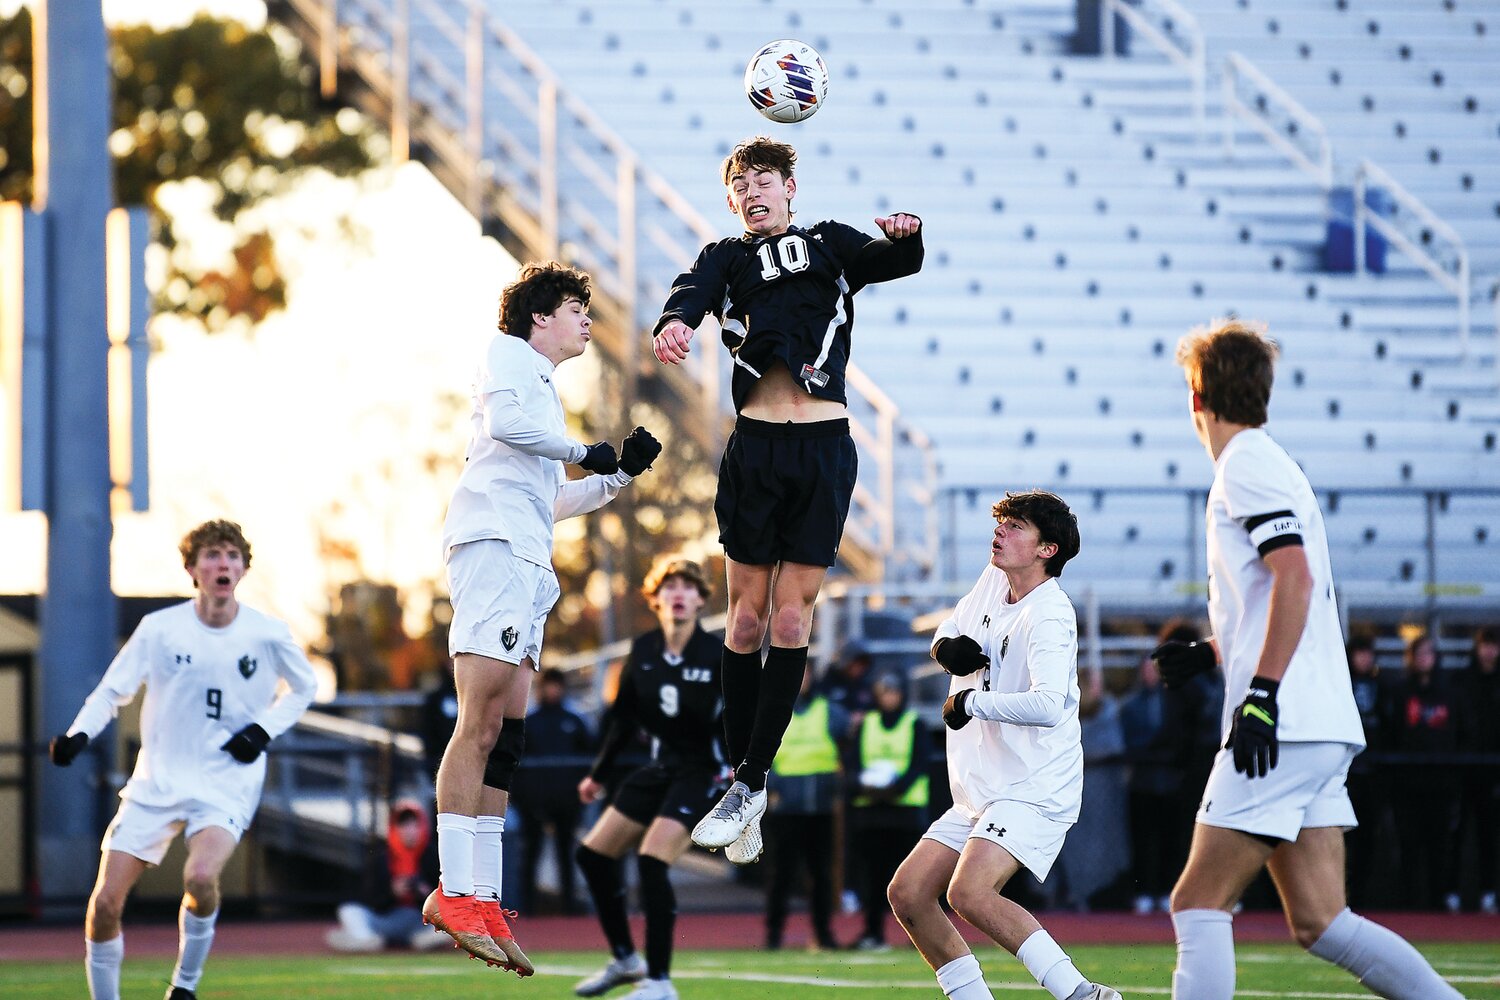 Faith Christian’s Logan Moore tries to redirect a corner kick to the goal during the first half.